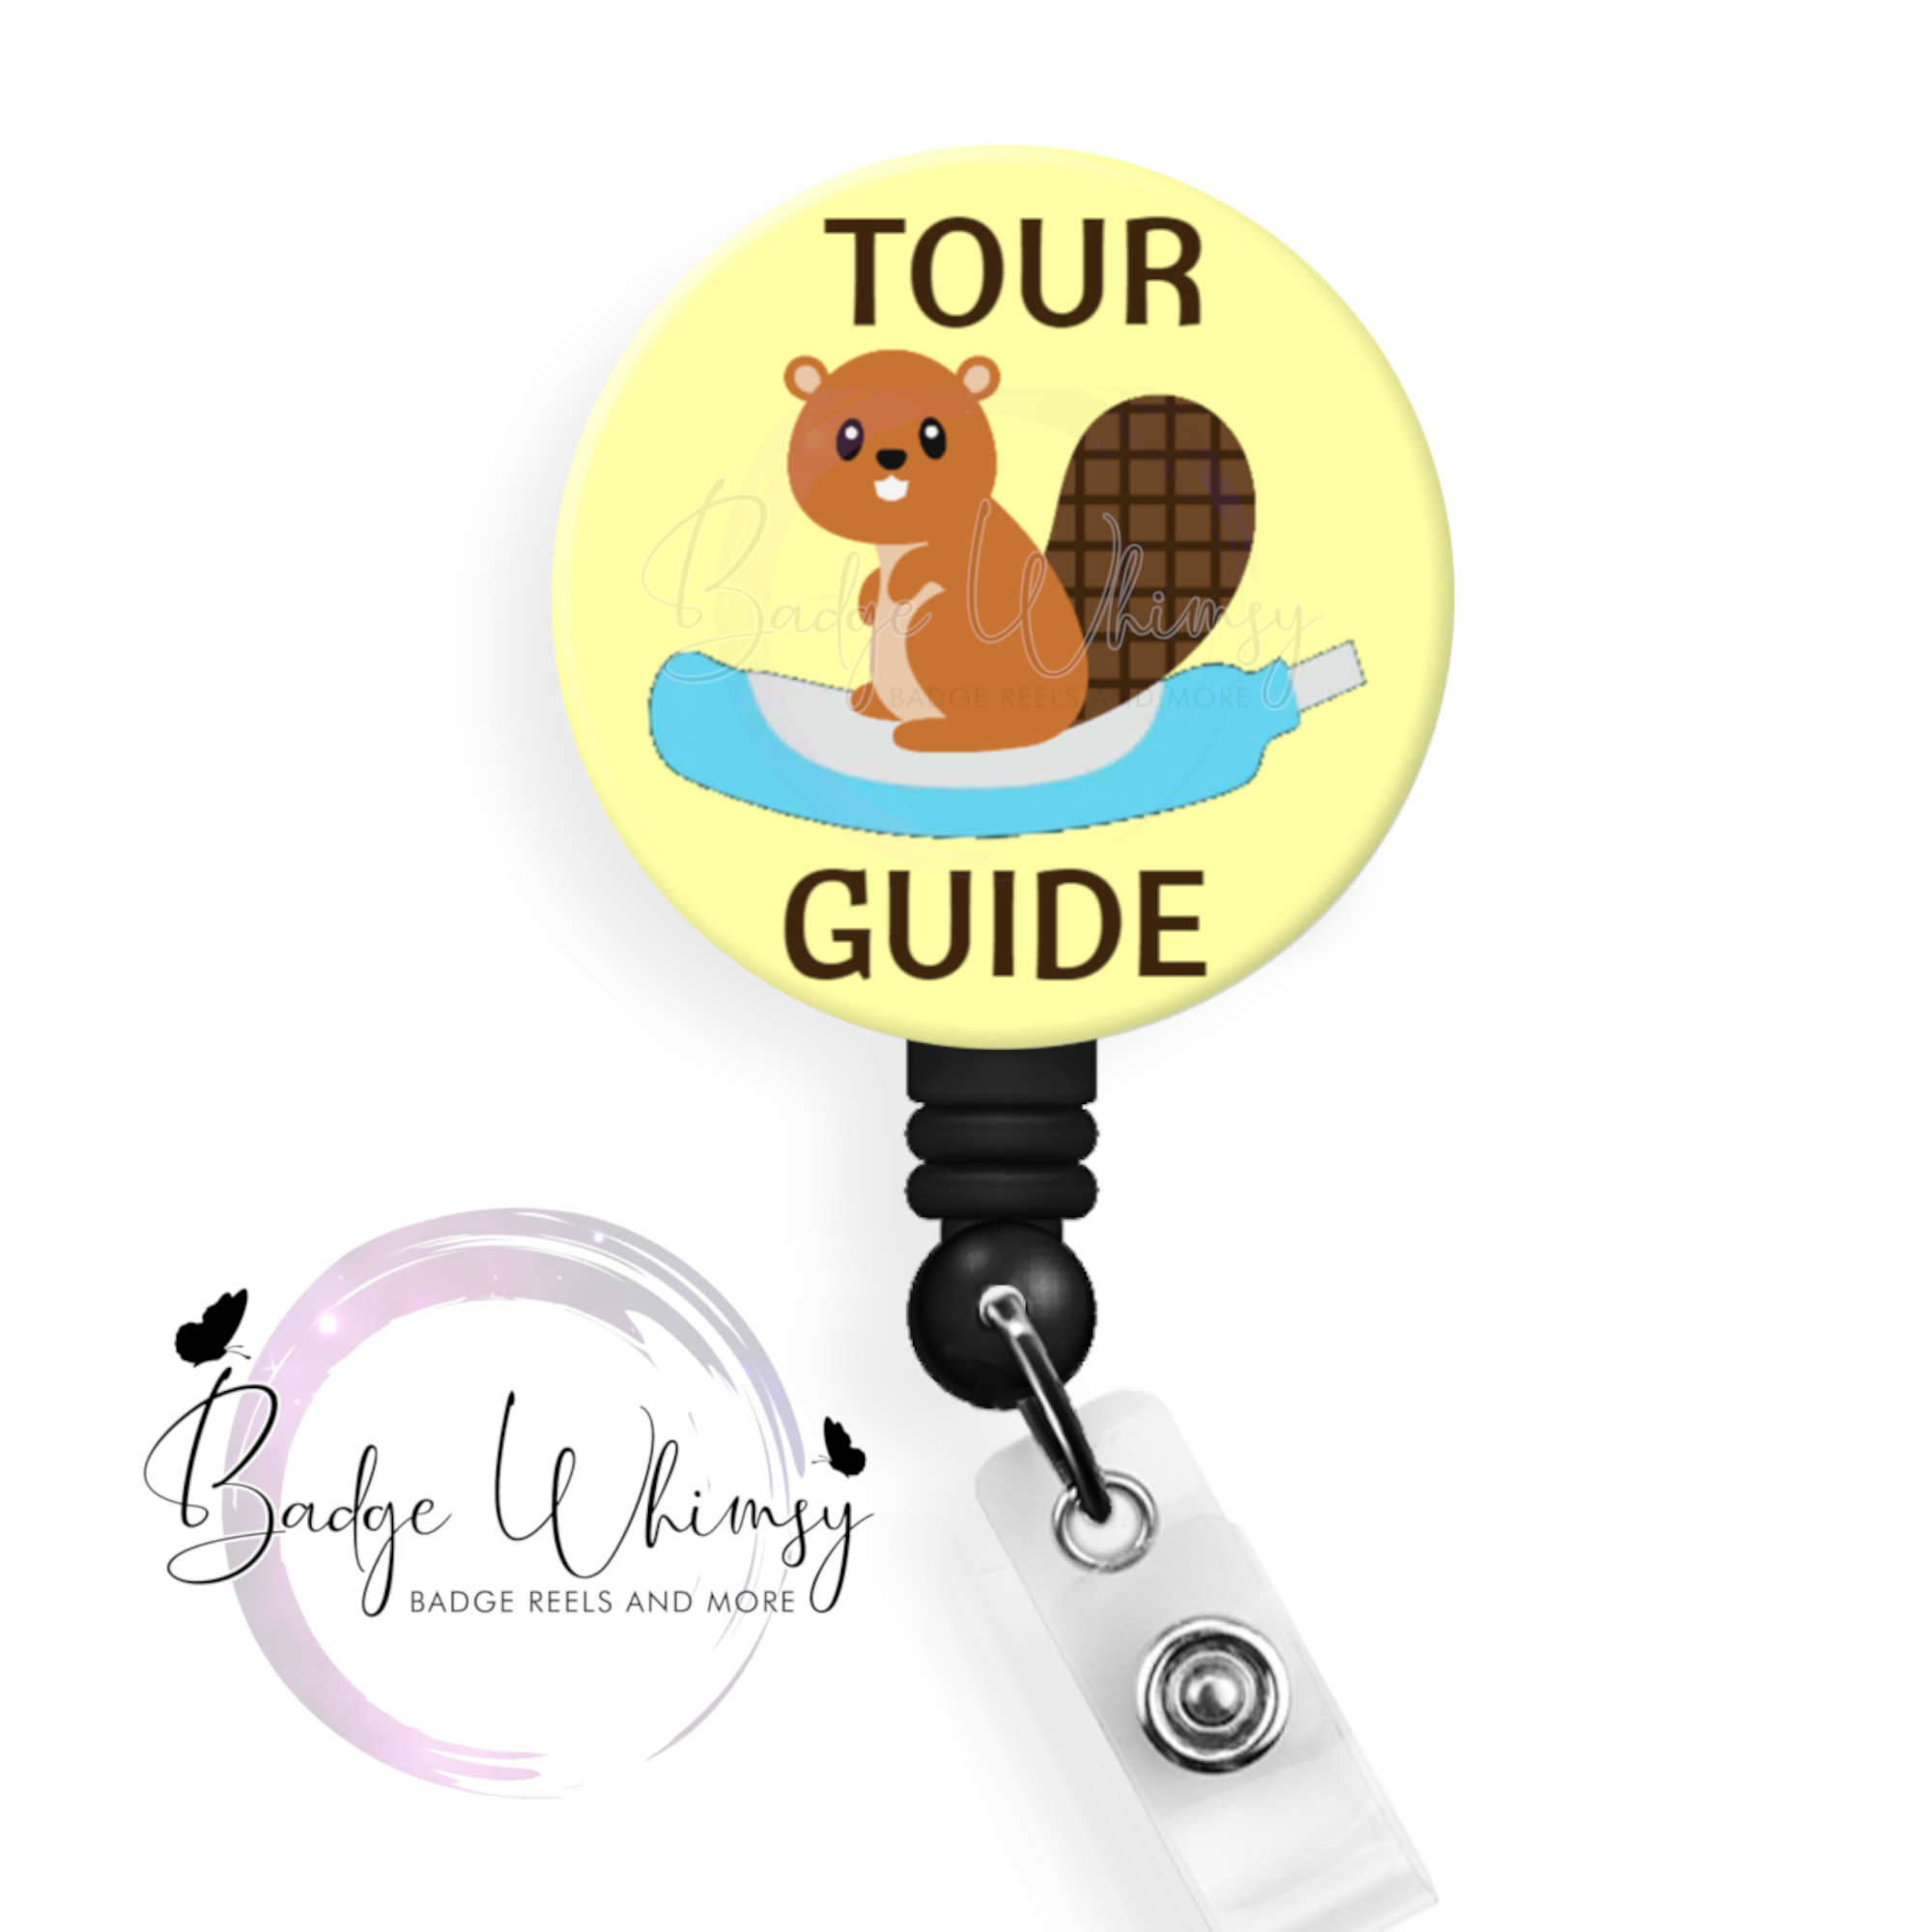 Cooter Canoe Tour Guide - Nurse - Pin, Magnet or Badge Holder